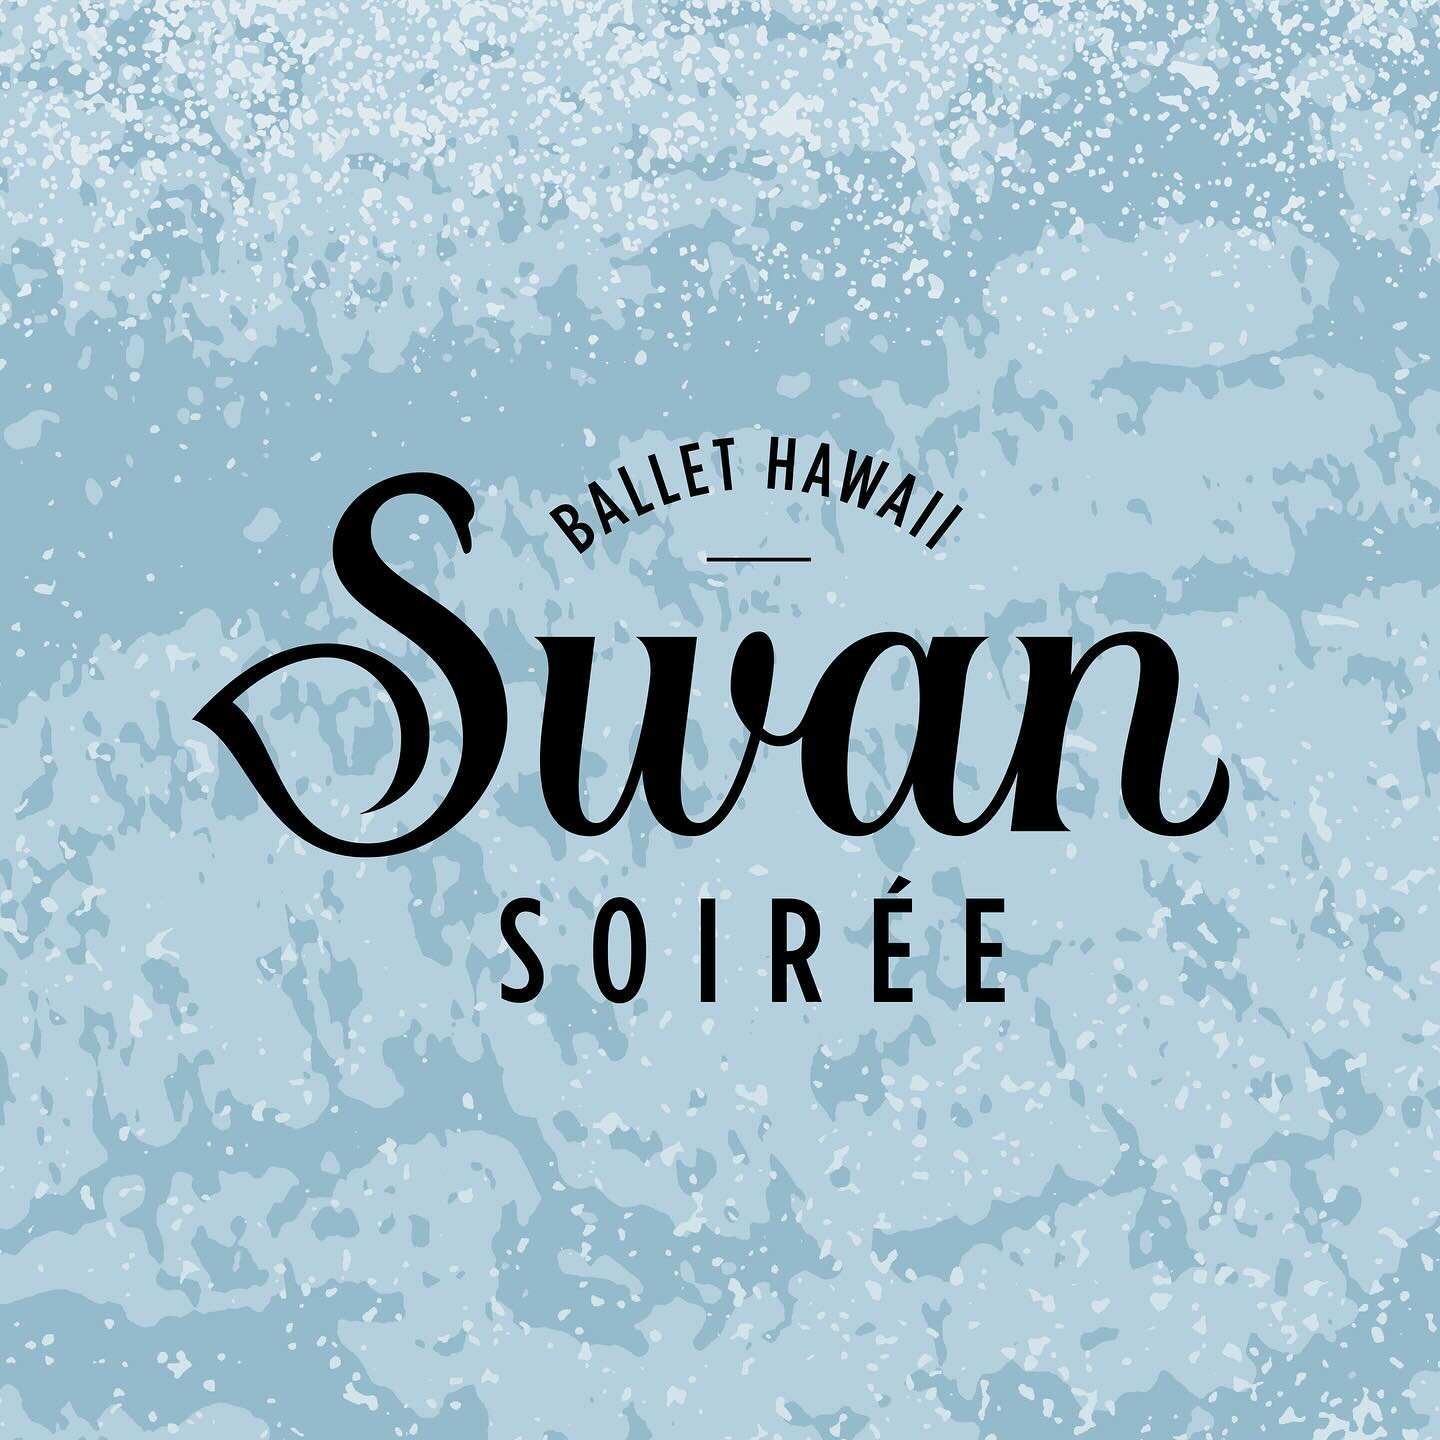 This goose is thrilled to share the freshly laid custom wordmark for Ballet Hawaii&rsquo;s Swan Soir&eacute;e Gala.
I&rsquo;m looking forward to sharing more eggsamples soon, including the illustration!
&bull;
Cheers to my kern coach @judlively for t